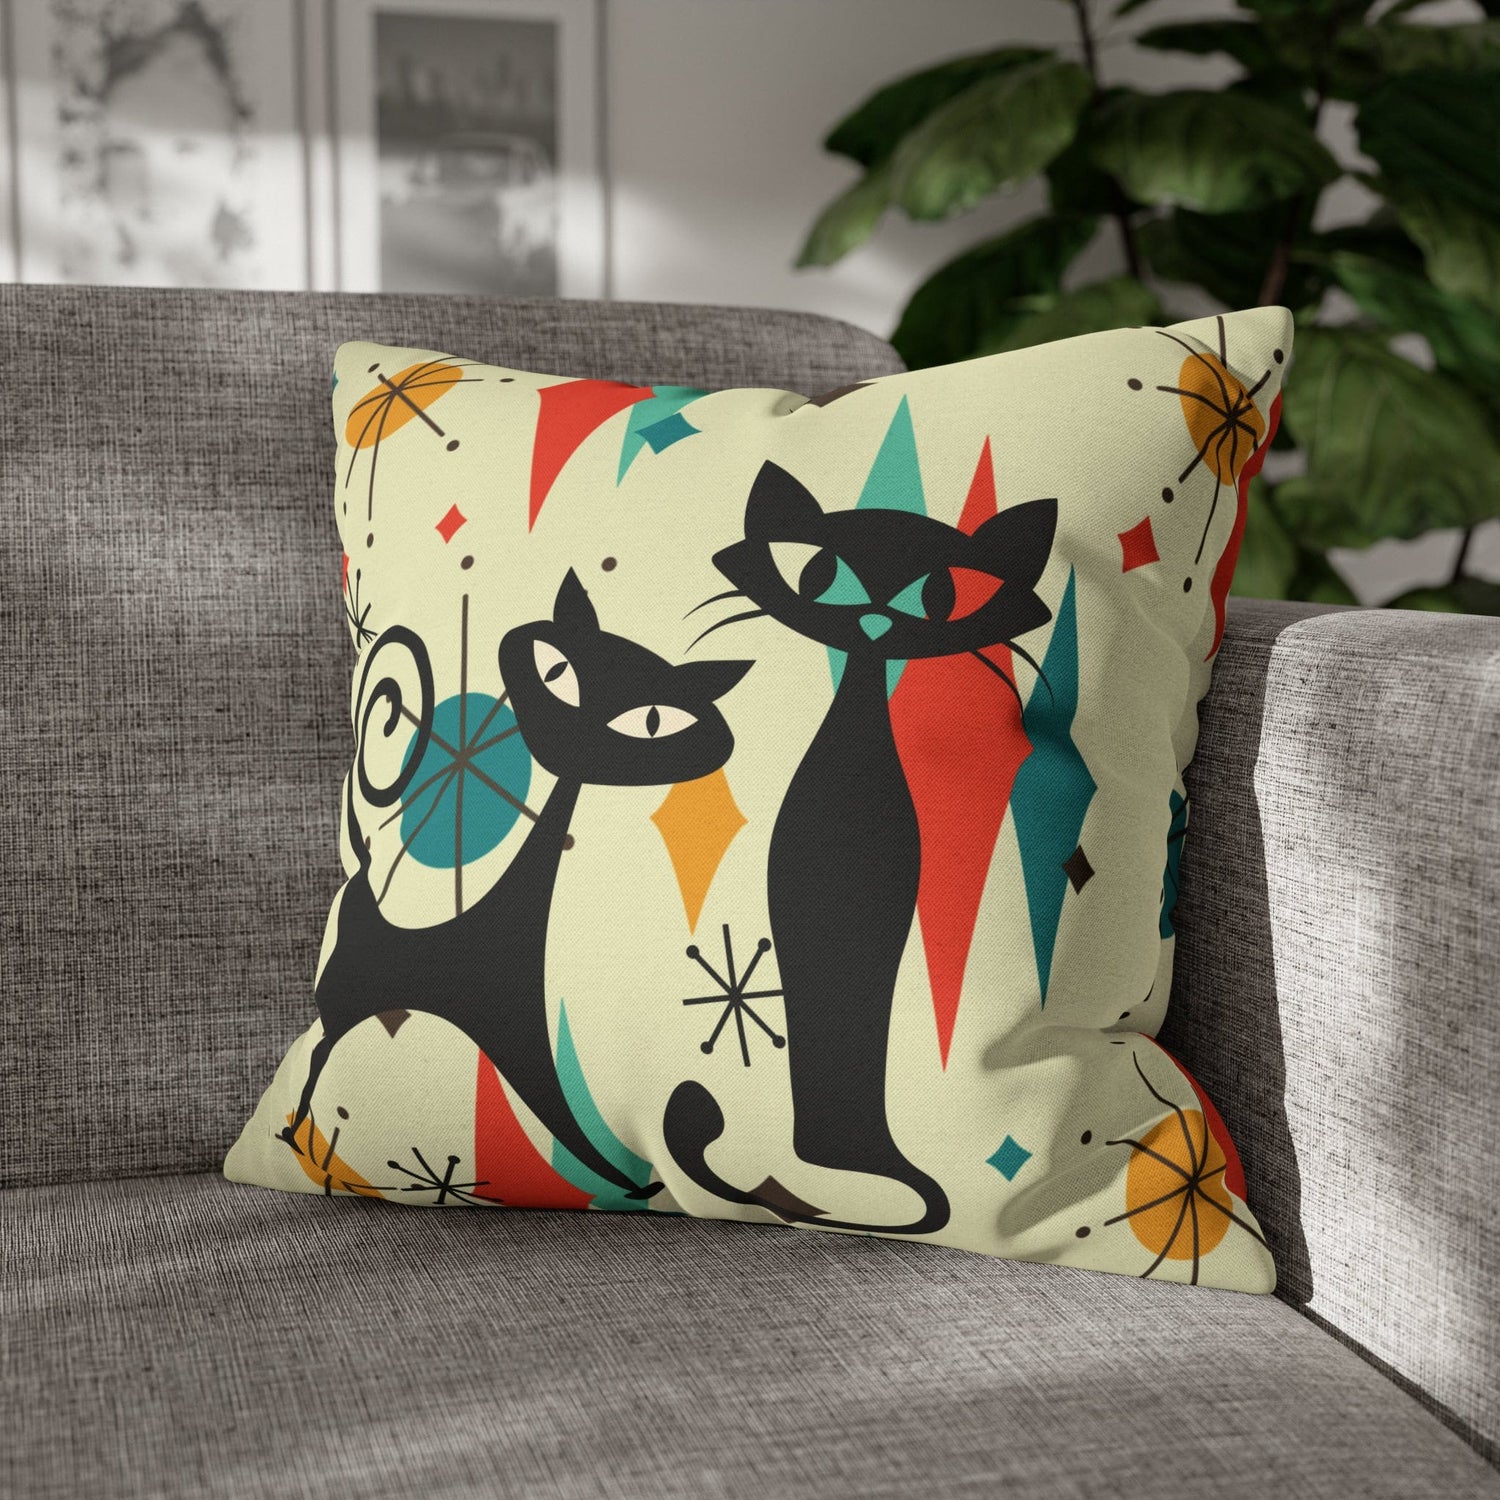 Kate McEnroe New York Atomic Cat Franciscan Diamond Starburst Pillow Cover, Mid Century Modern Retro Kitschy Living Room, Bedroom Accent PillowThrow Pillow Covers10812311349282954132